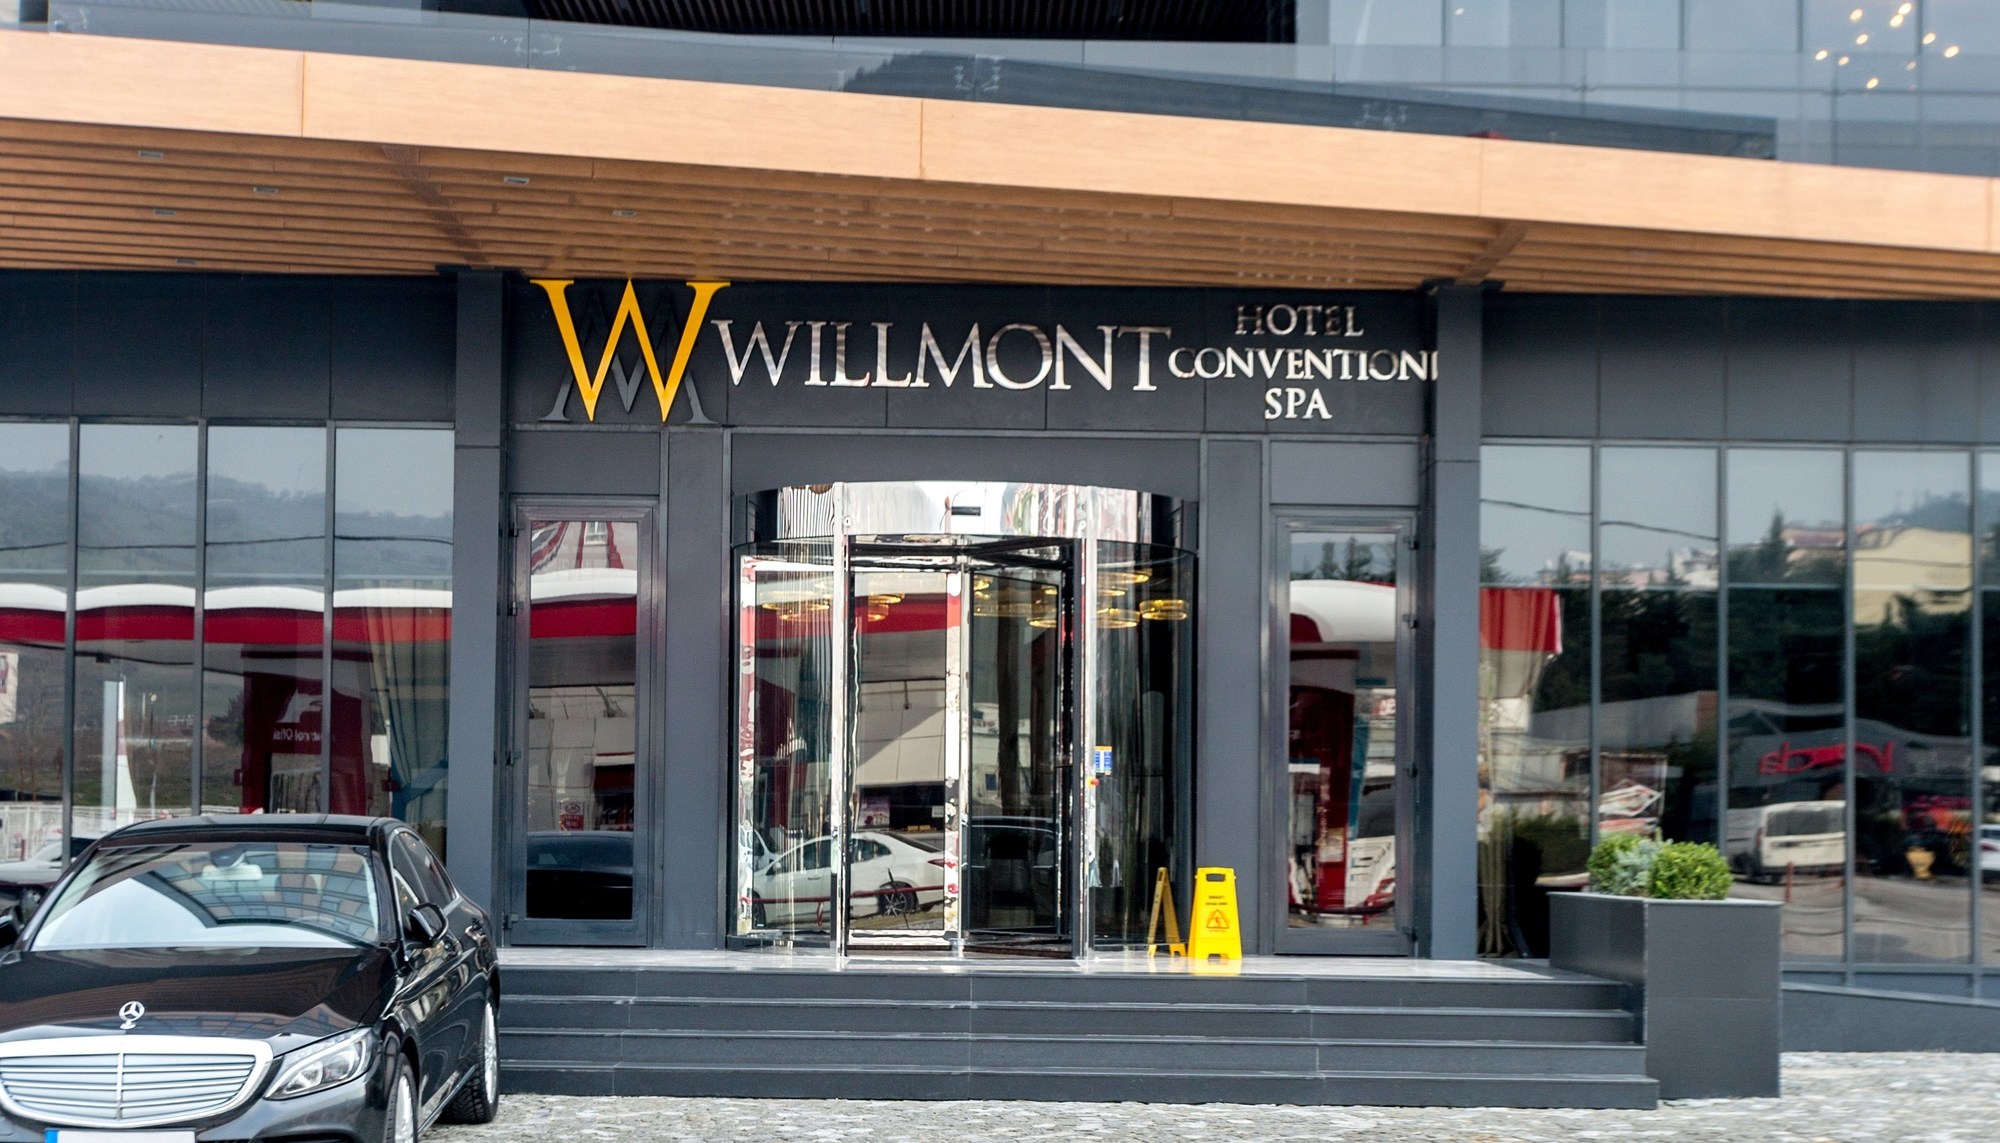 Willmont Hotel Convention & Spa Center